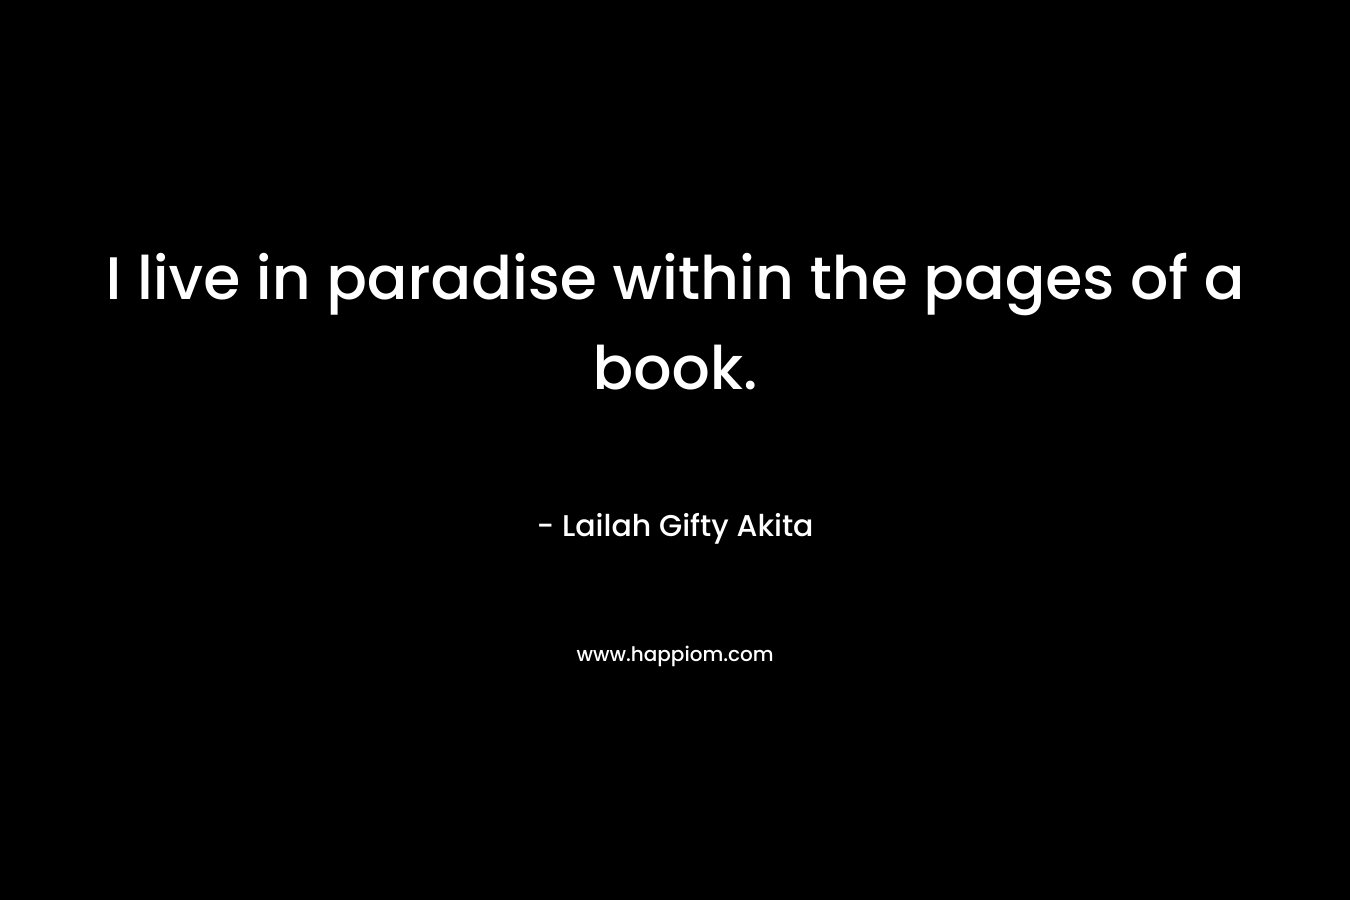 I live in paradise within the pages of a book.